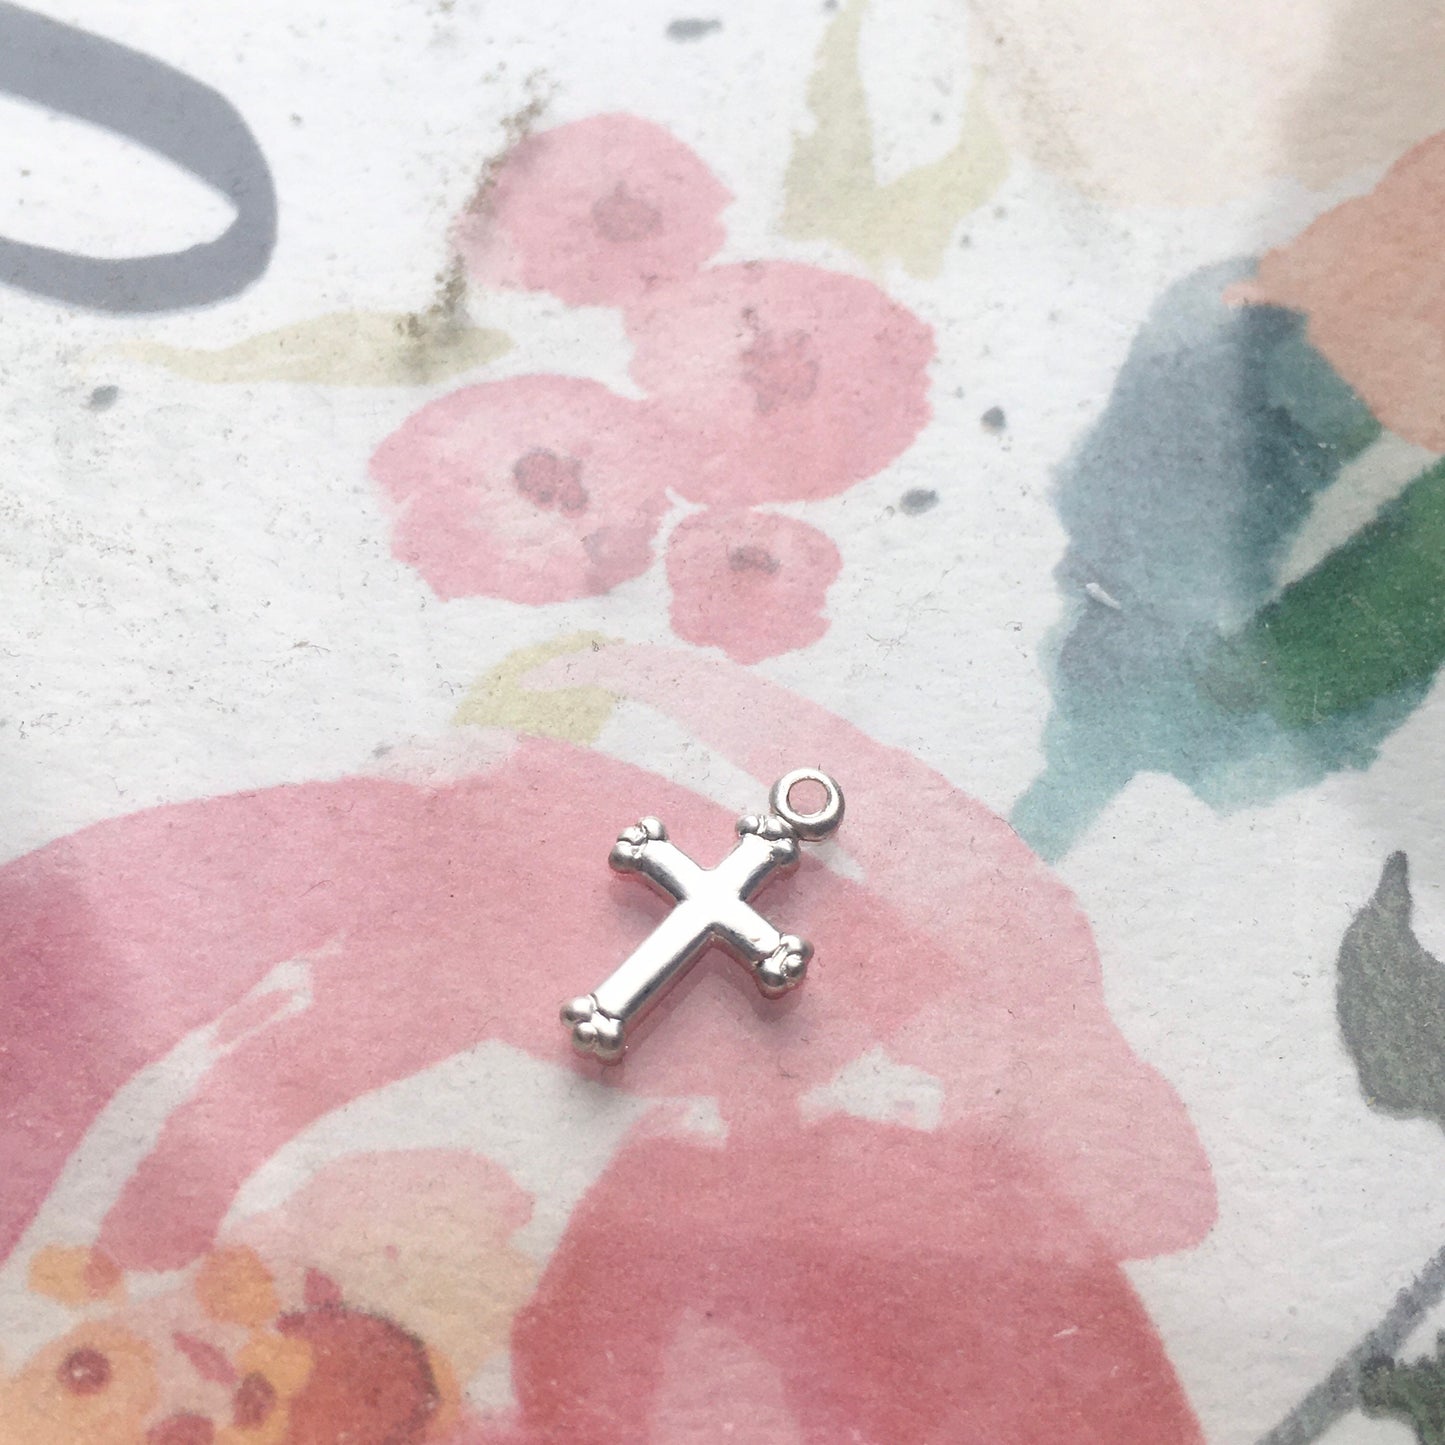 Tiny Silver Cross Charms Fancy Small Sterling Crosses Pendants for Jewelry